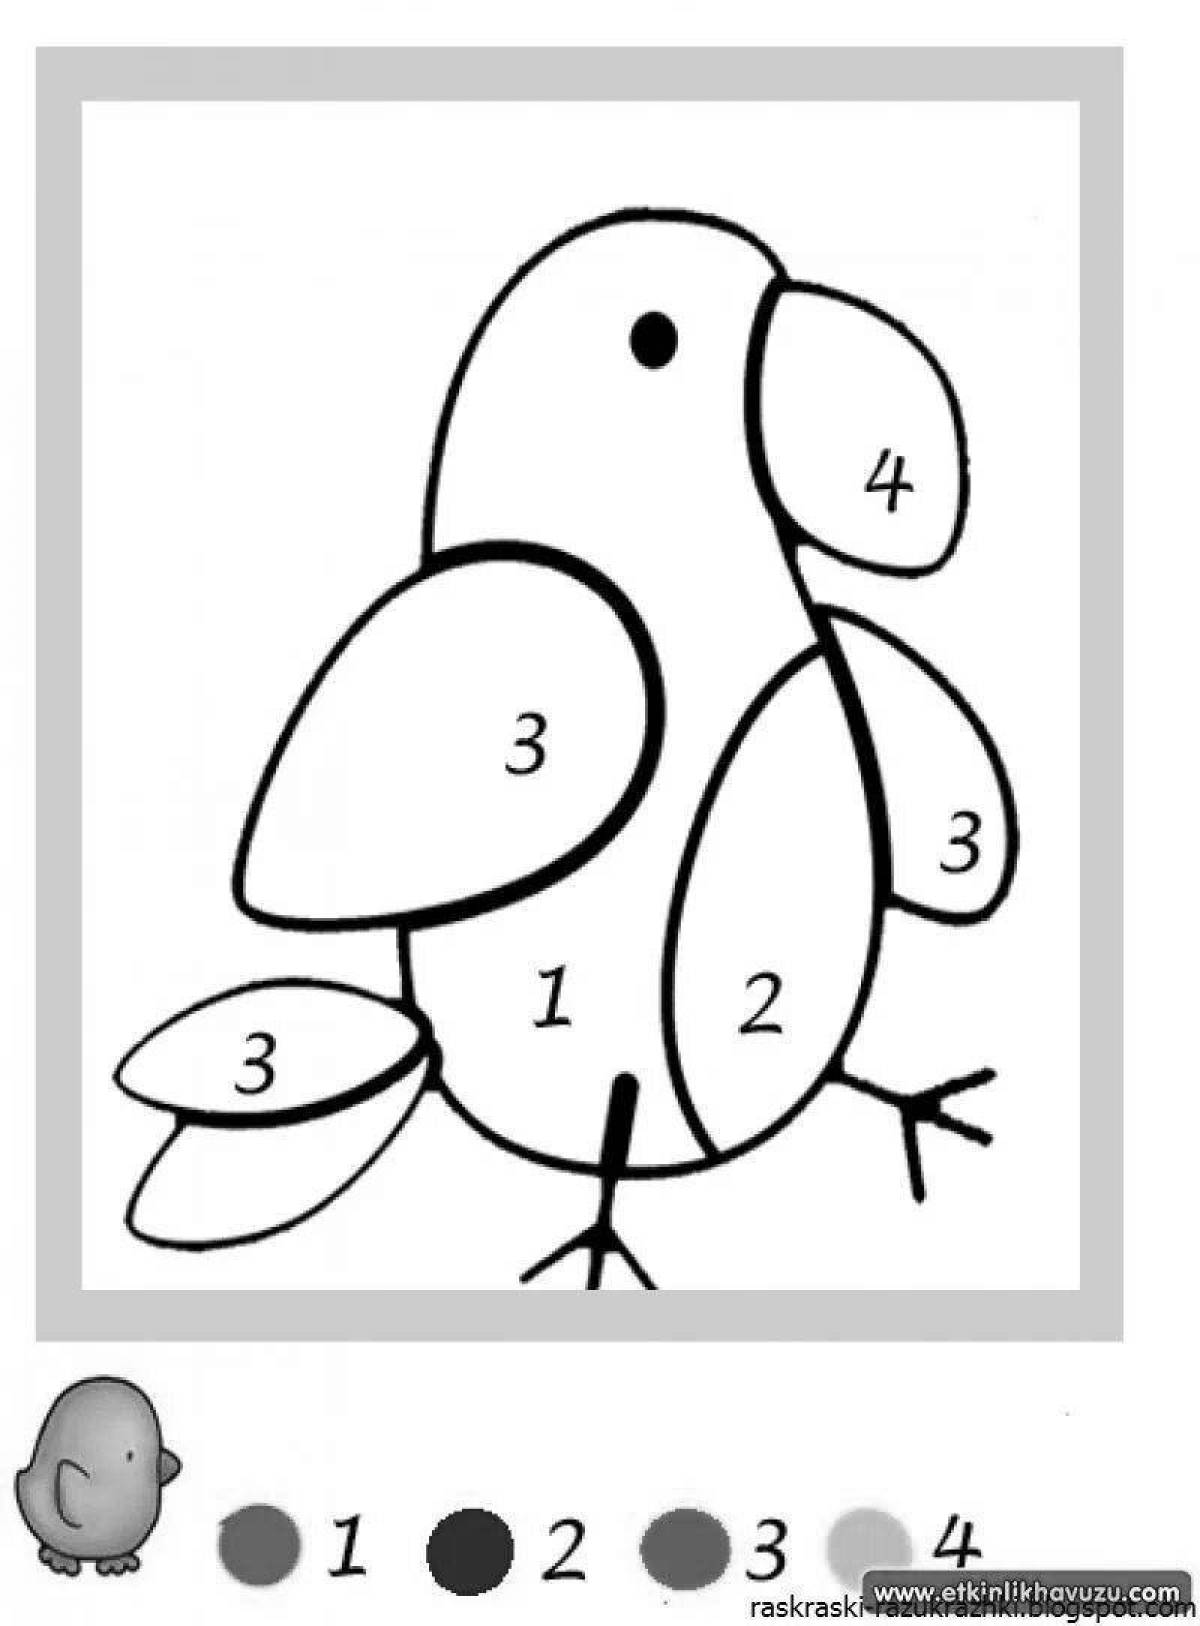 Fun simple by numbers coloring page